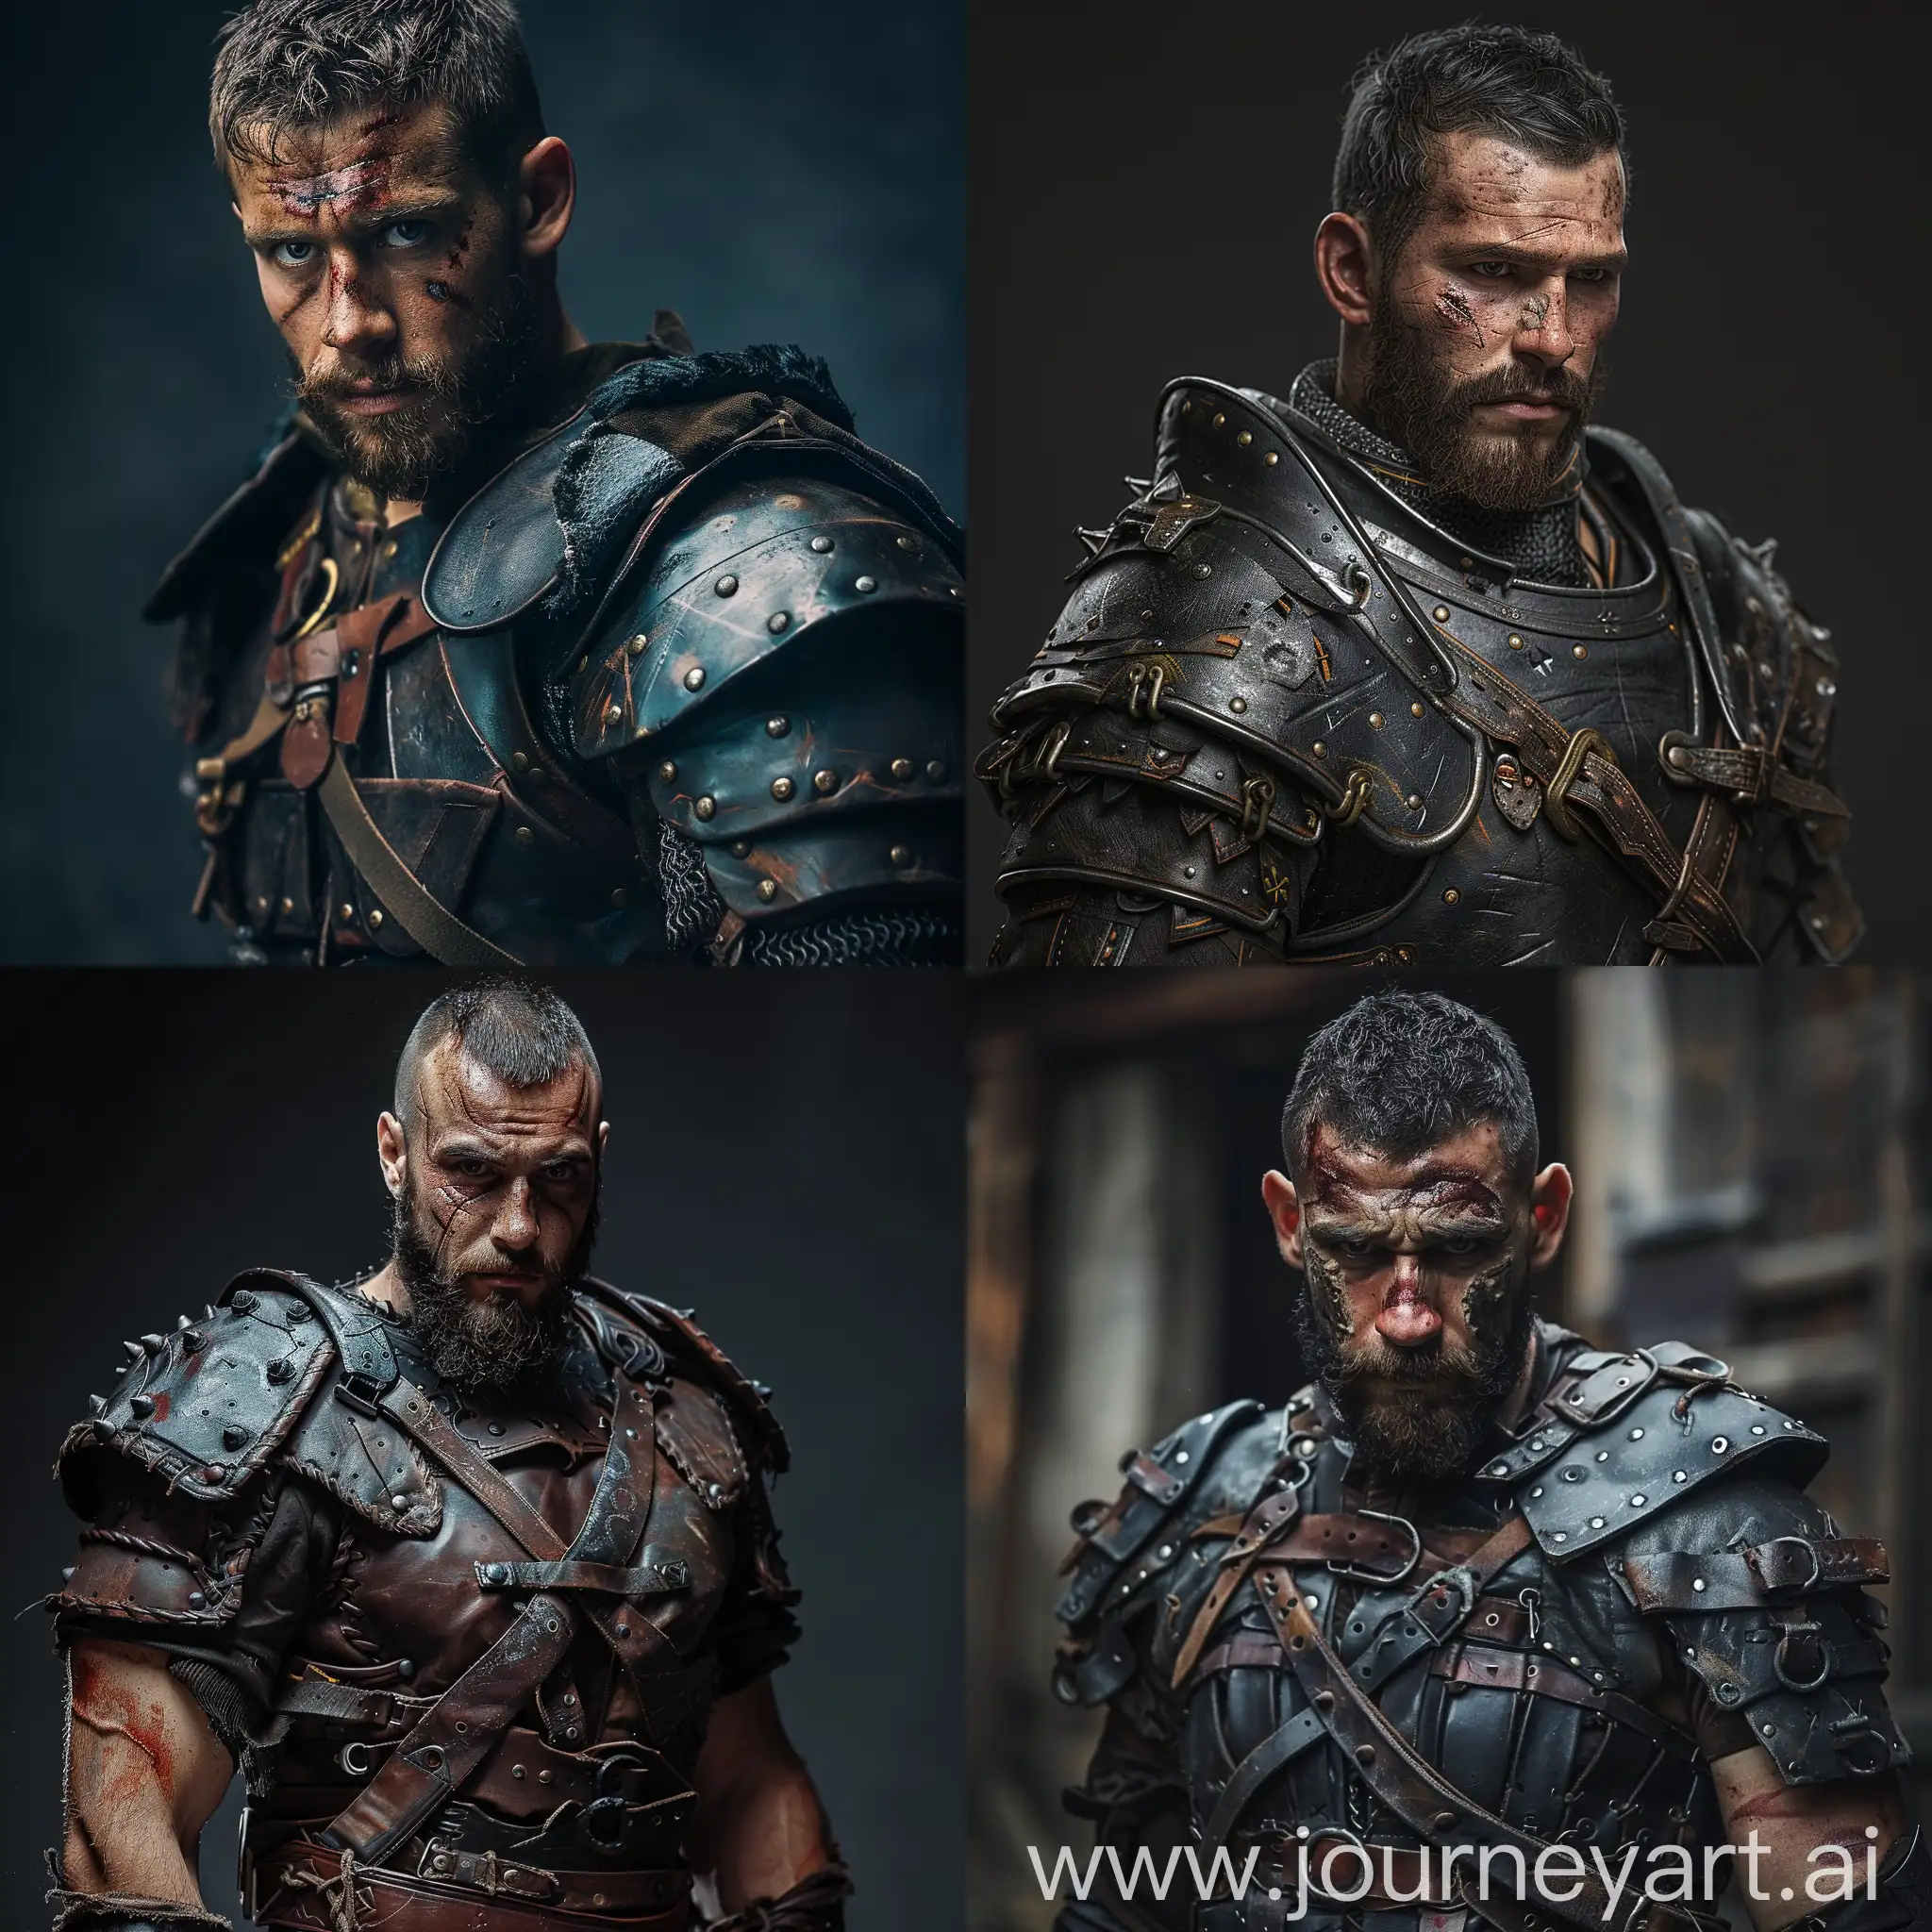 Medieval-Fantasy-Fighter-in-Leather-Armor-with-Scar-and-Beard